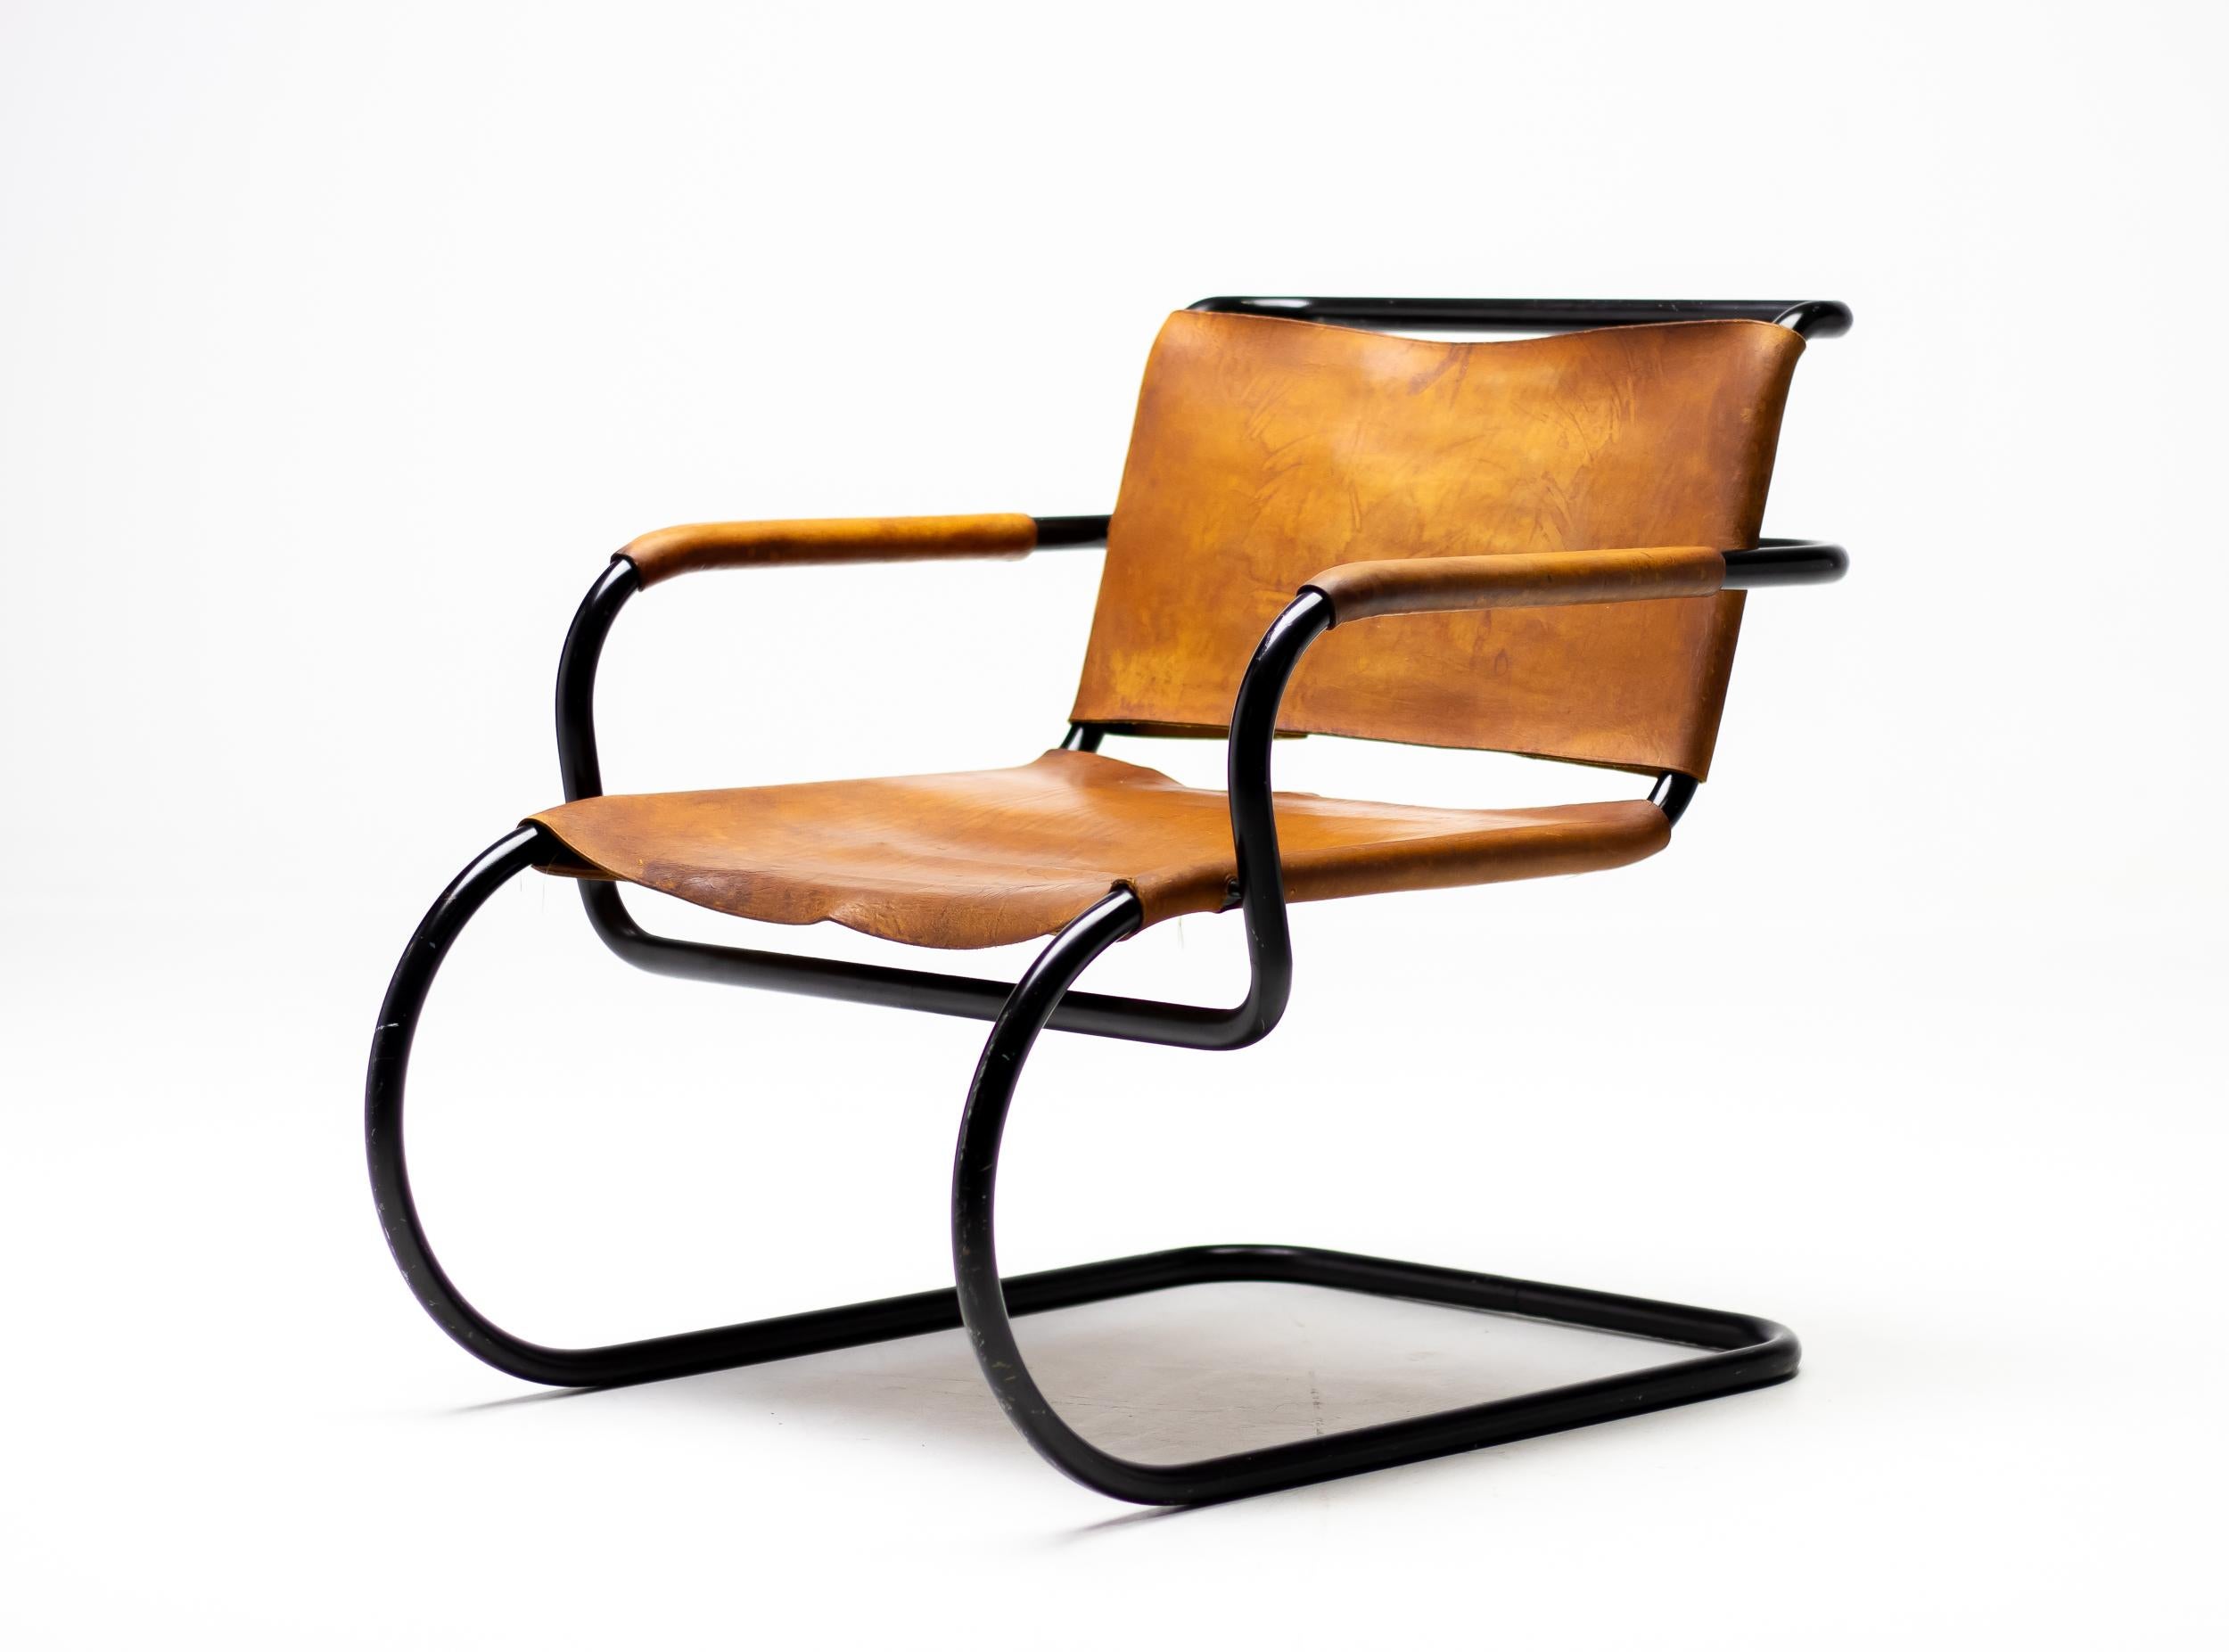 Steel Triënnale Lounge Chair by Franco Albini, 1933 For Sale